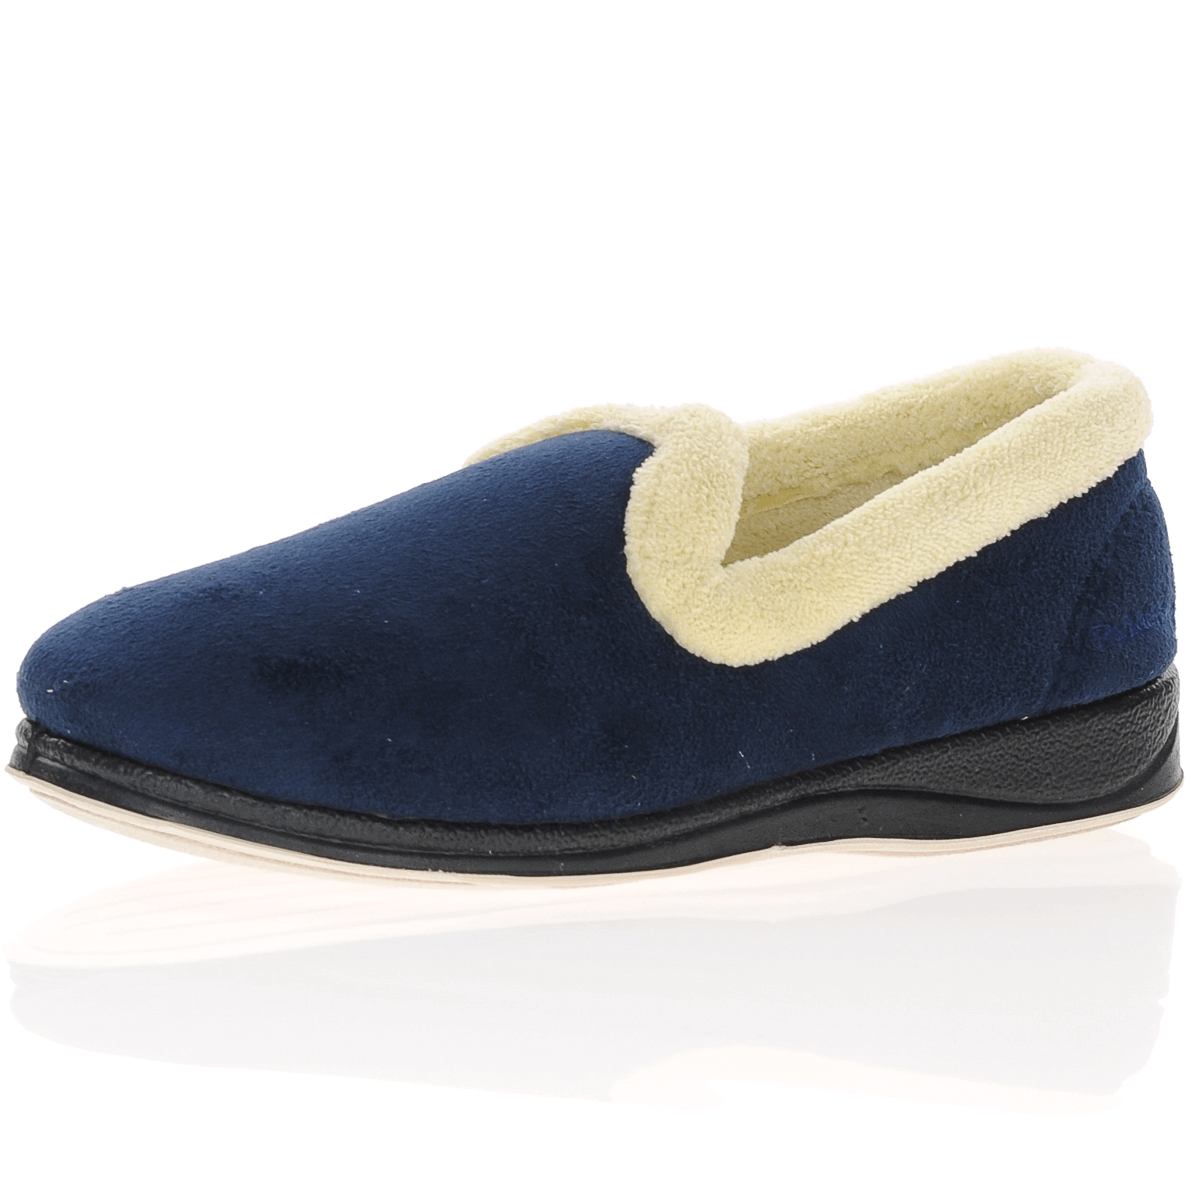 Padders - Repose Warm Lined Slippers, Navy, The Shoe Horn